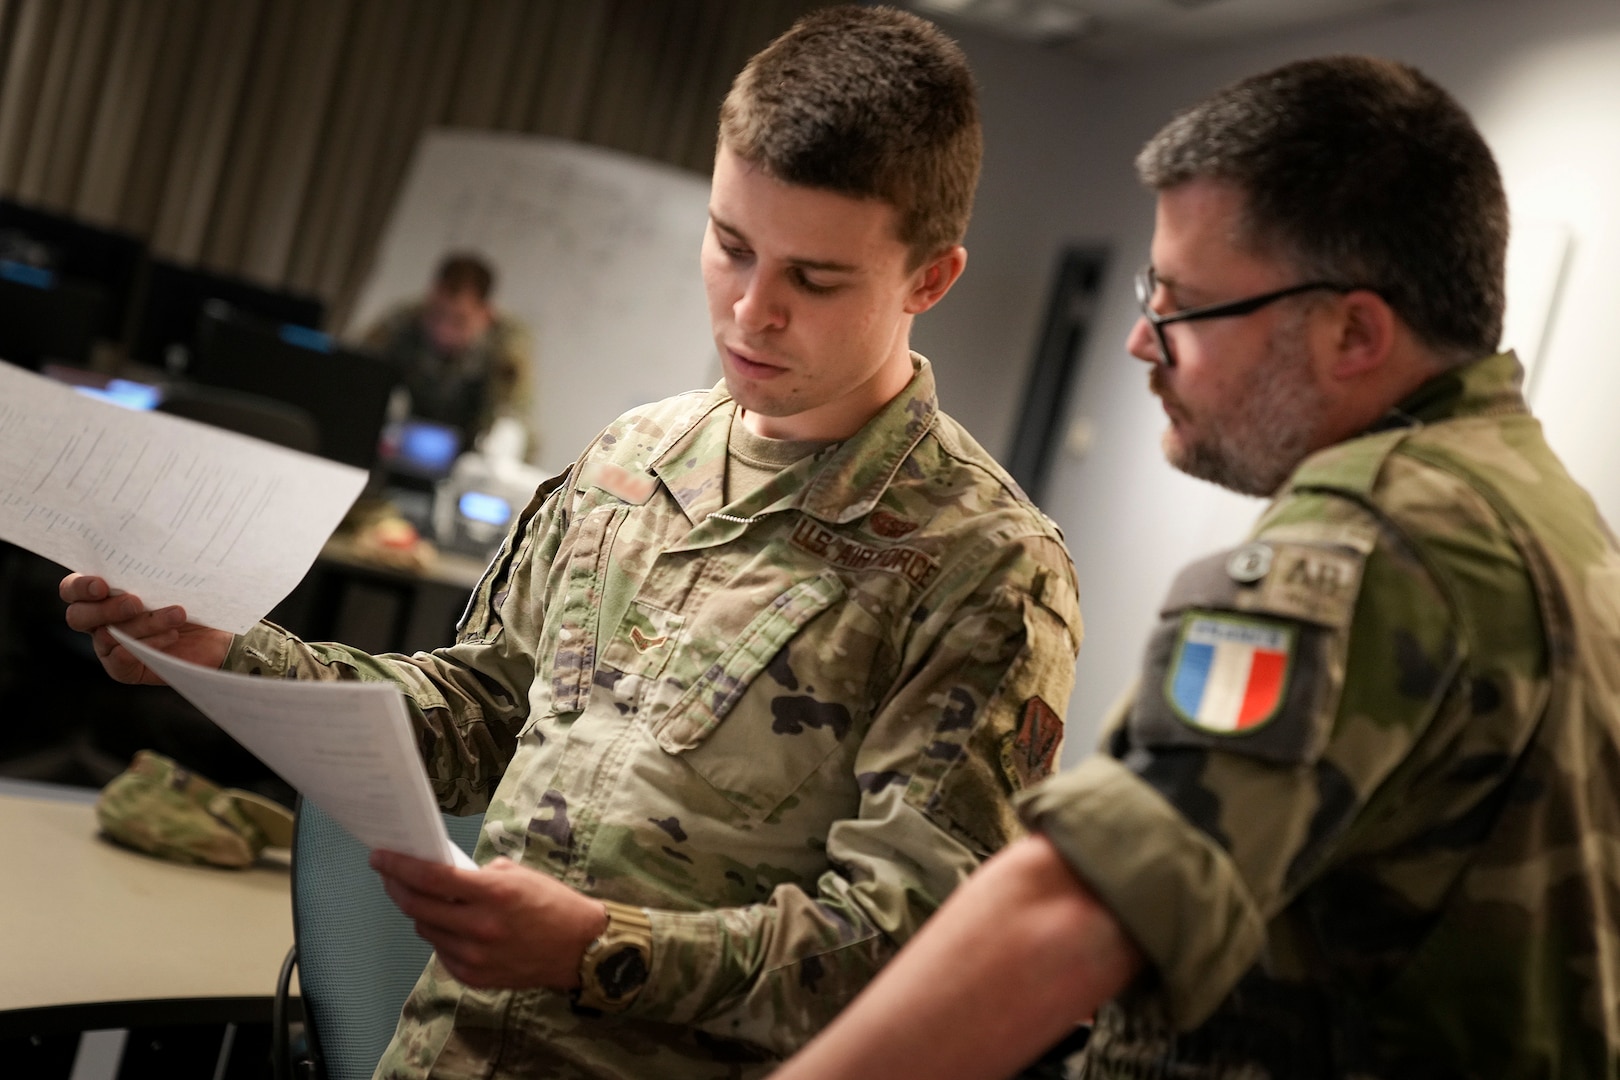 U.S. Cyber Command and French cyber warriors collaborate during the training exercise, Cyber Fort III, at Fort George G. Meade, Md., July 21, 2021.